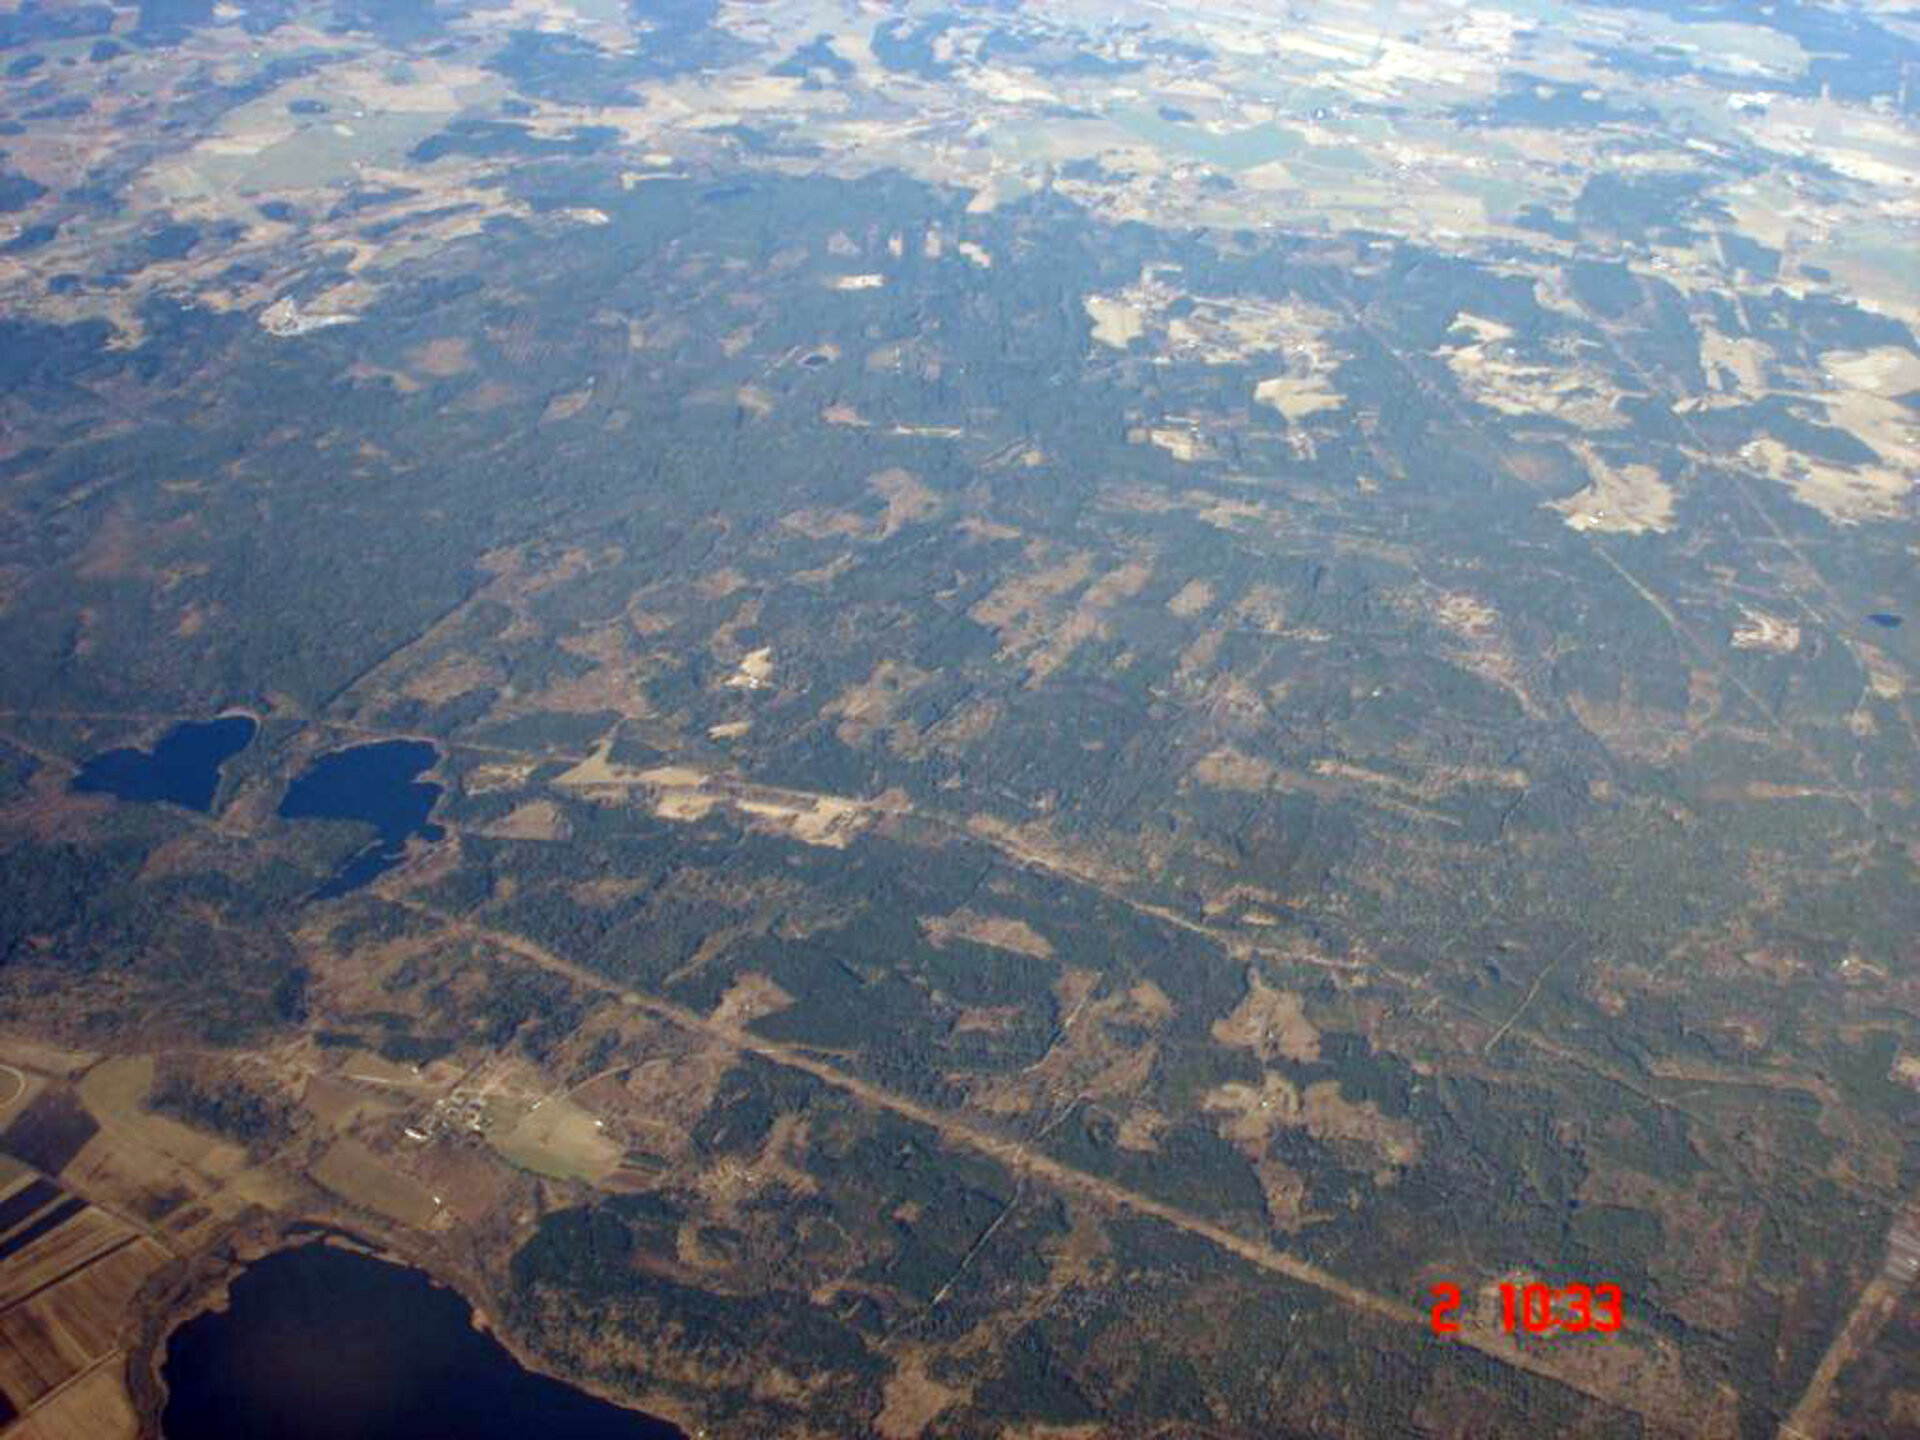 Aerial view of the Remningstorp test site